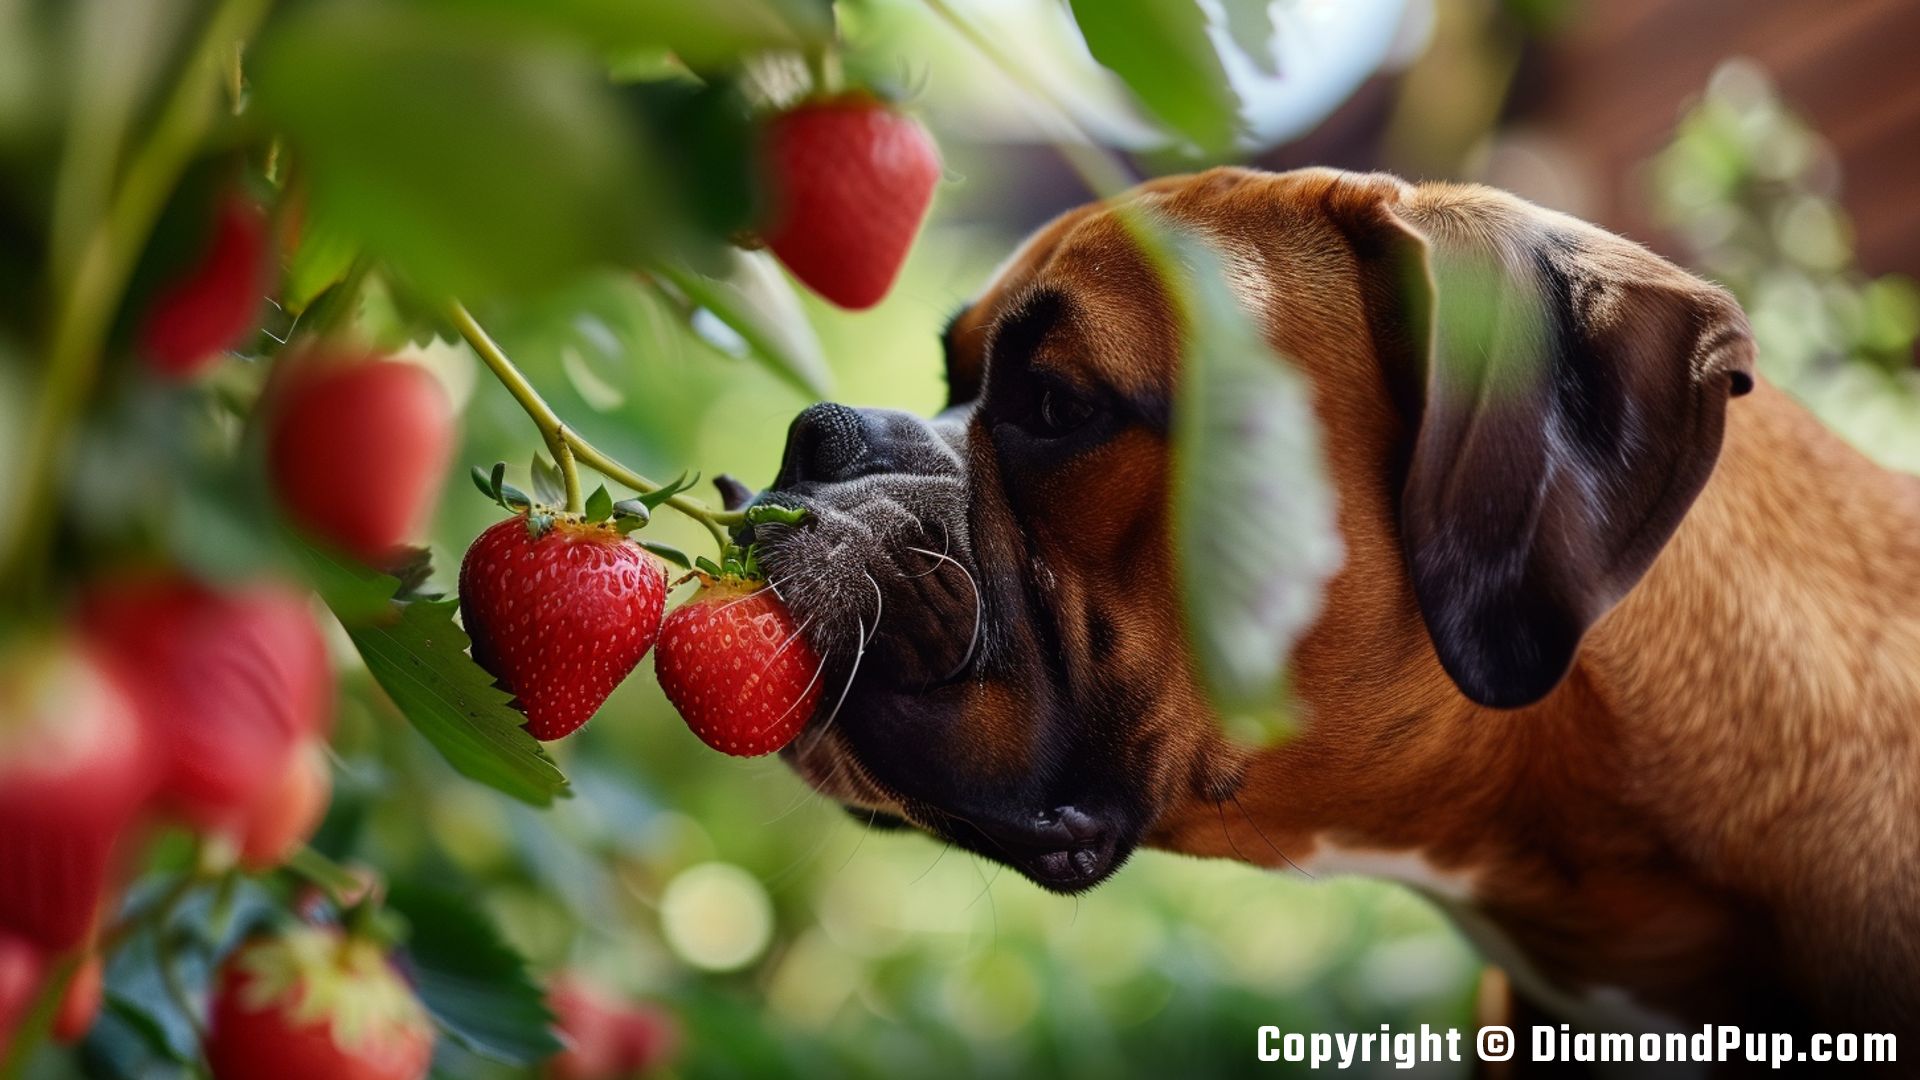 Photograph of a Playful Boxer Eating Strawberries